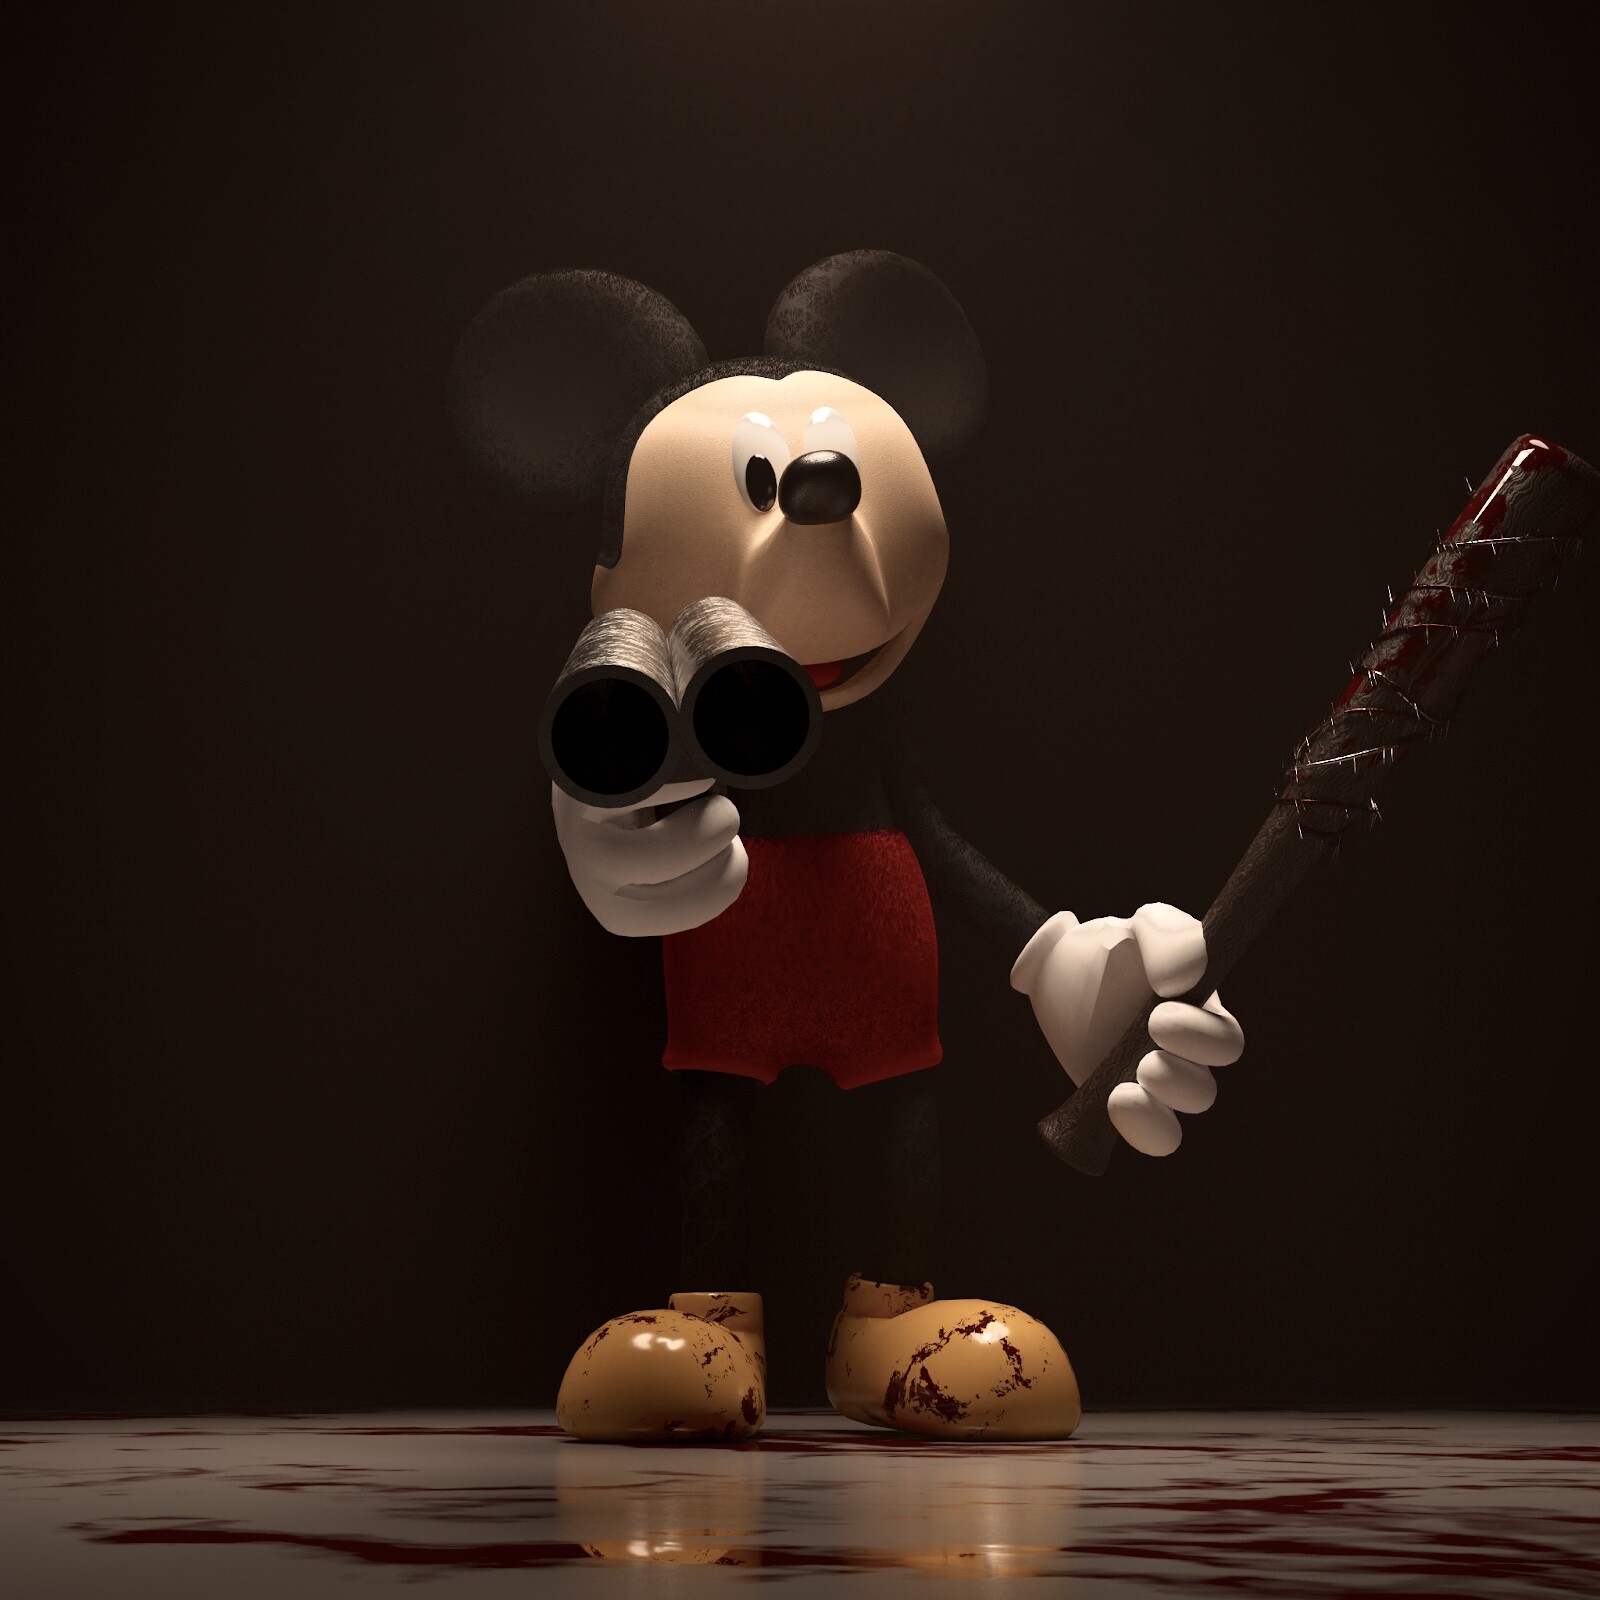 ArtStation - Mickey Mouse Clubhouse  Thumbnail